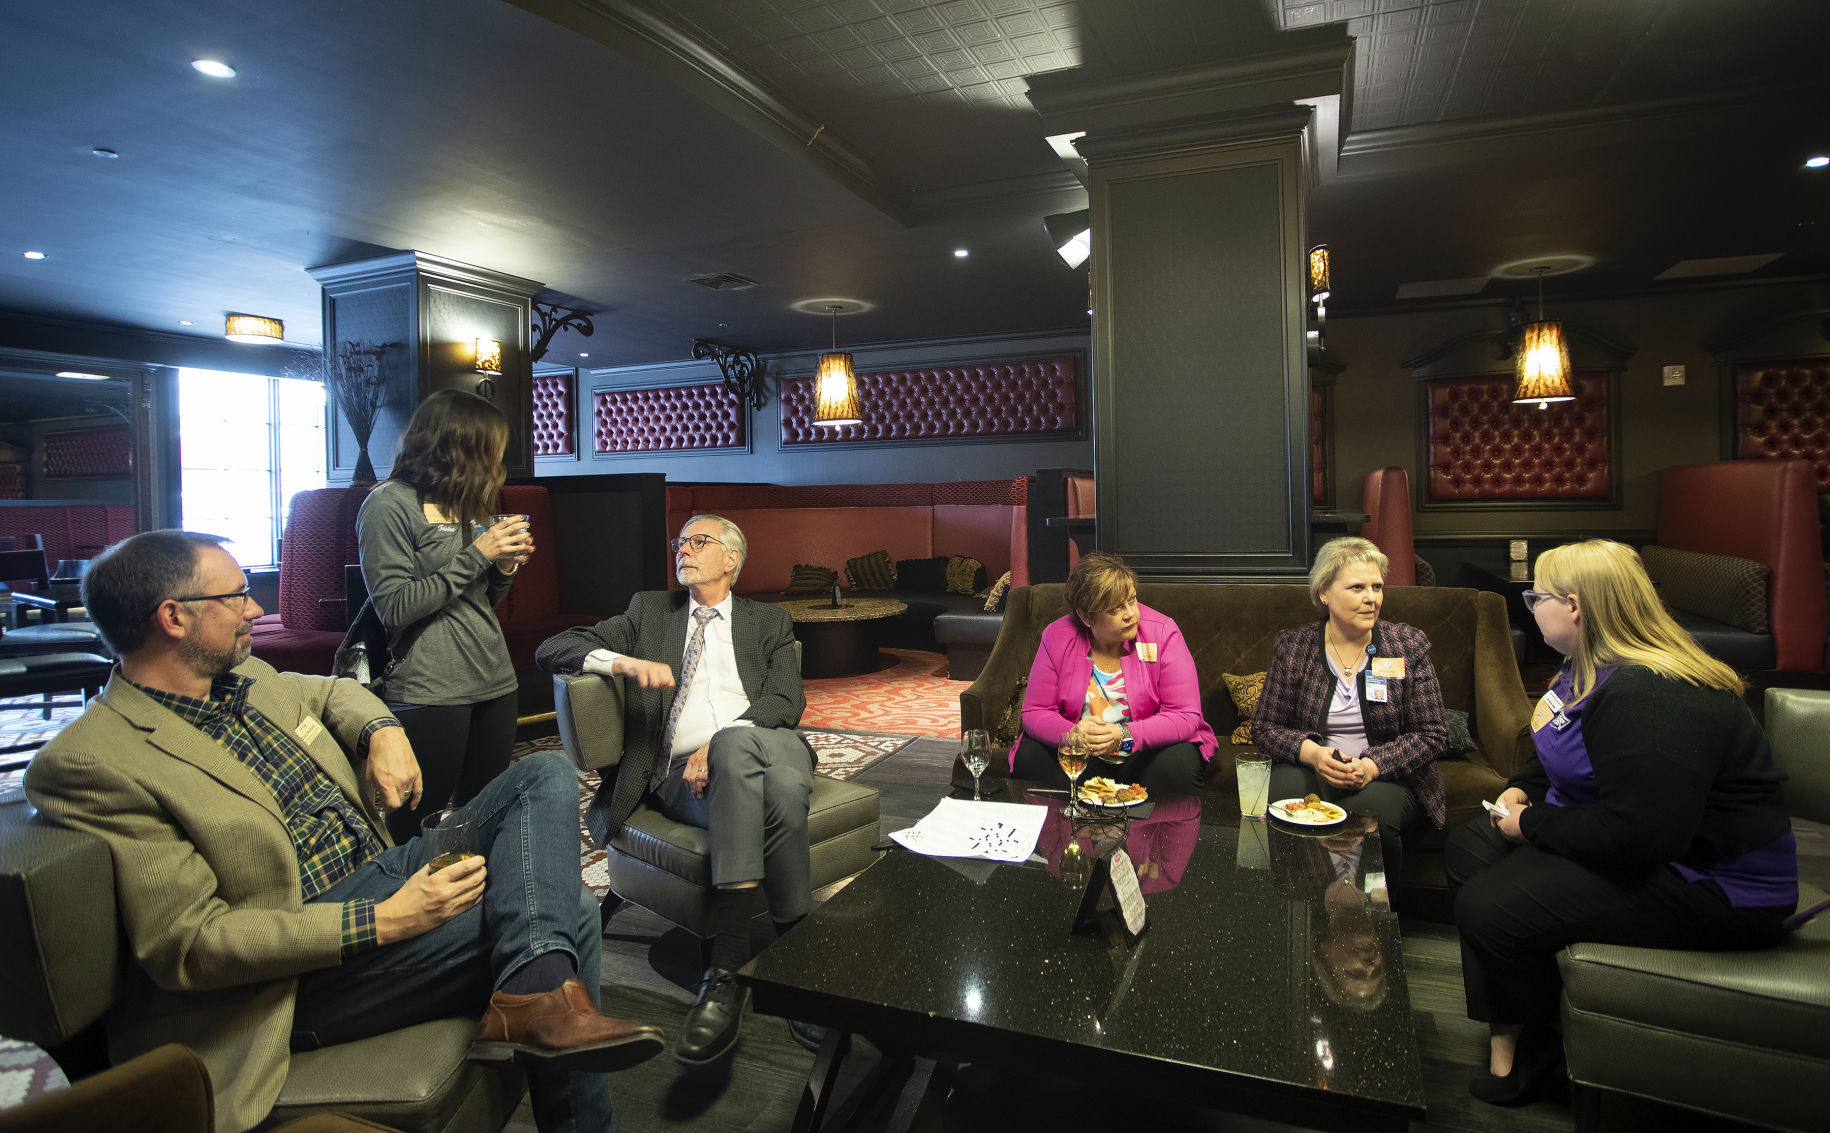 Local business leaders mingle during the Executive Meet and Greet in the Riverboat Lounge in Hotel Julien Dubuque on Tuesday, April 19, 2022.    PHOTO CREDIT: Stephen Gassman